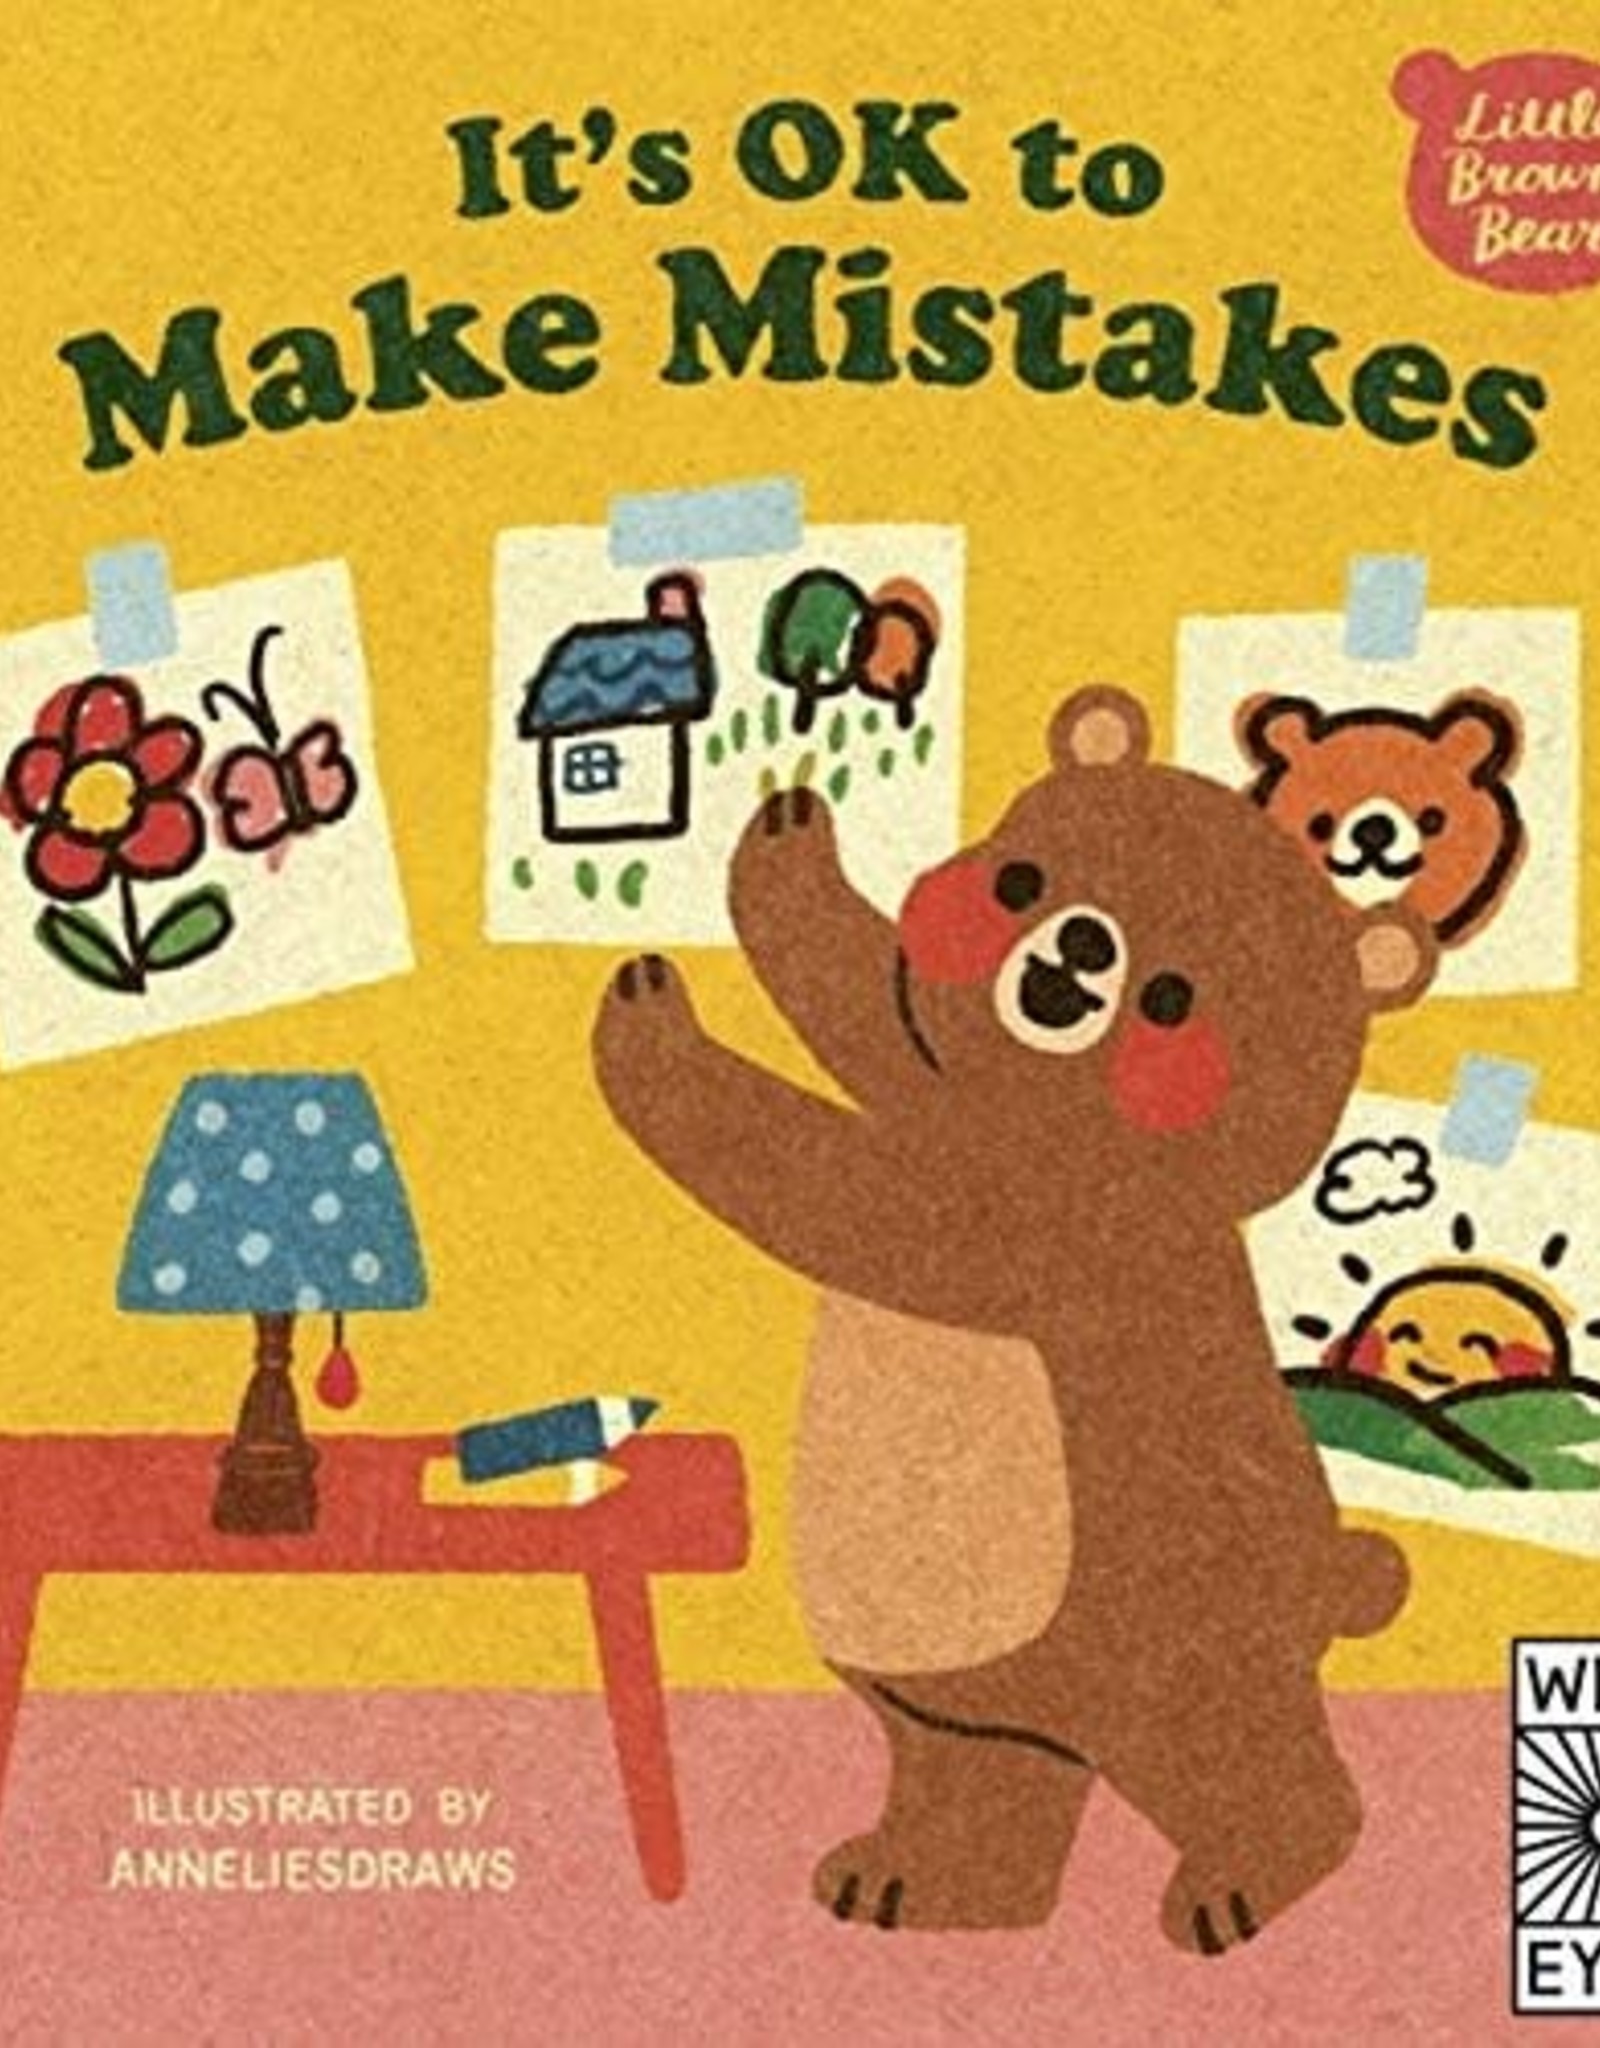 BOOK PUBLISHERS IT'S OK TO MAKE MISTAKES